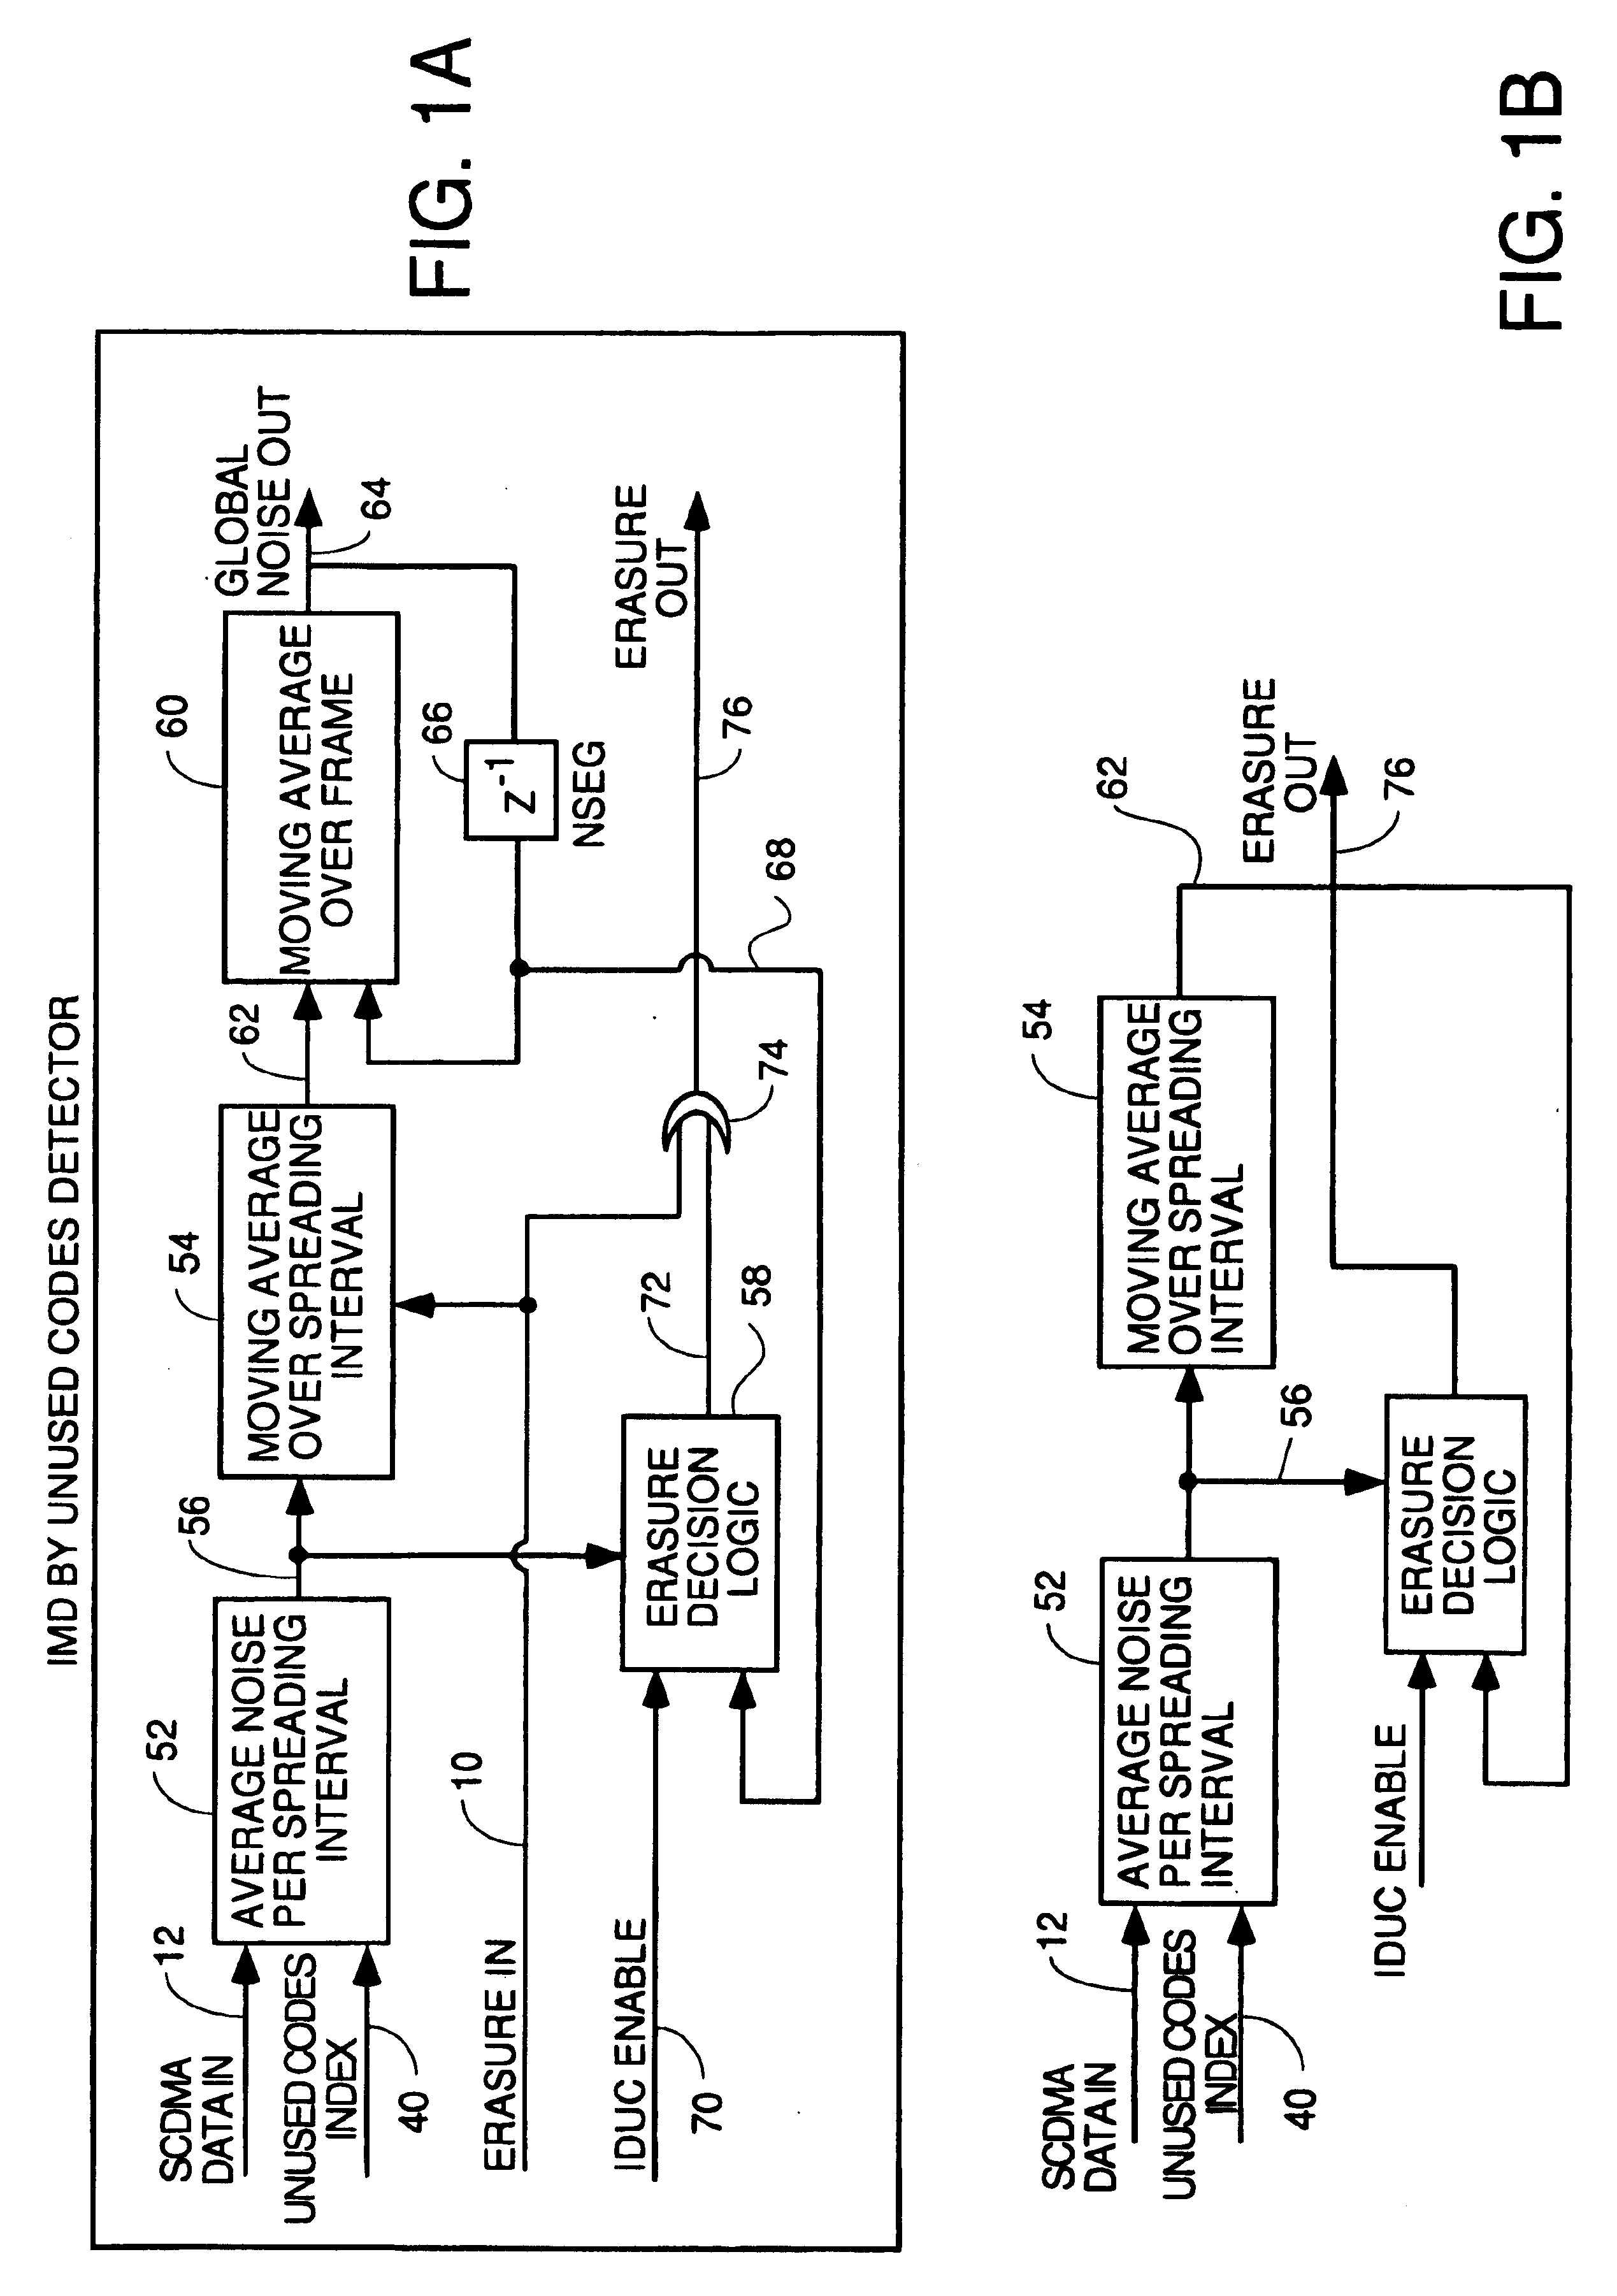 Detection of impulse noise using unused codes in CDMA systems